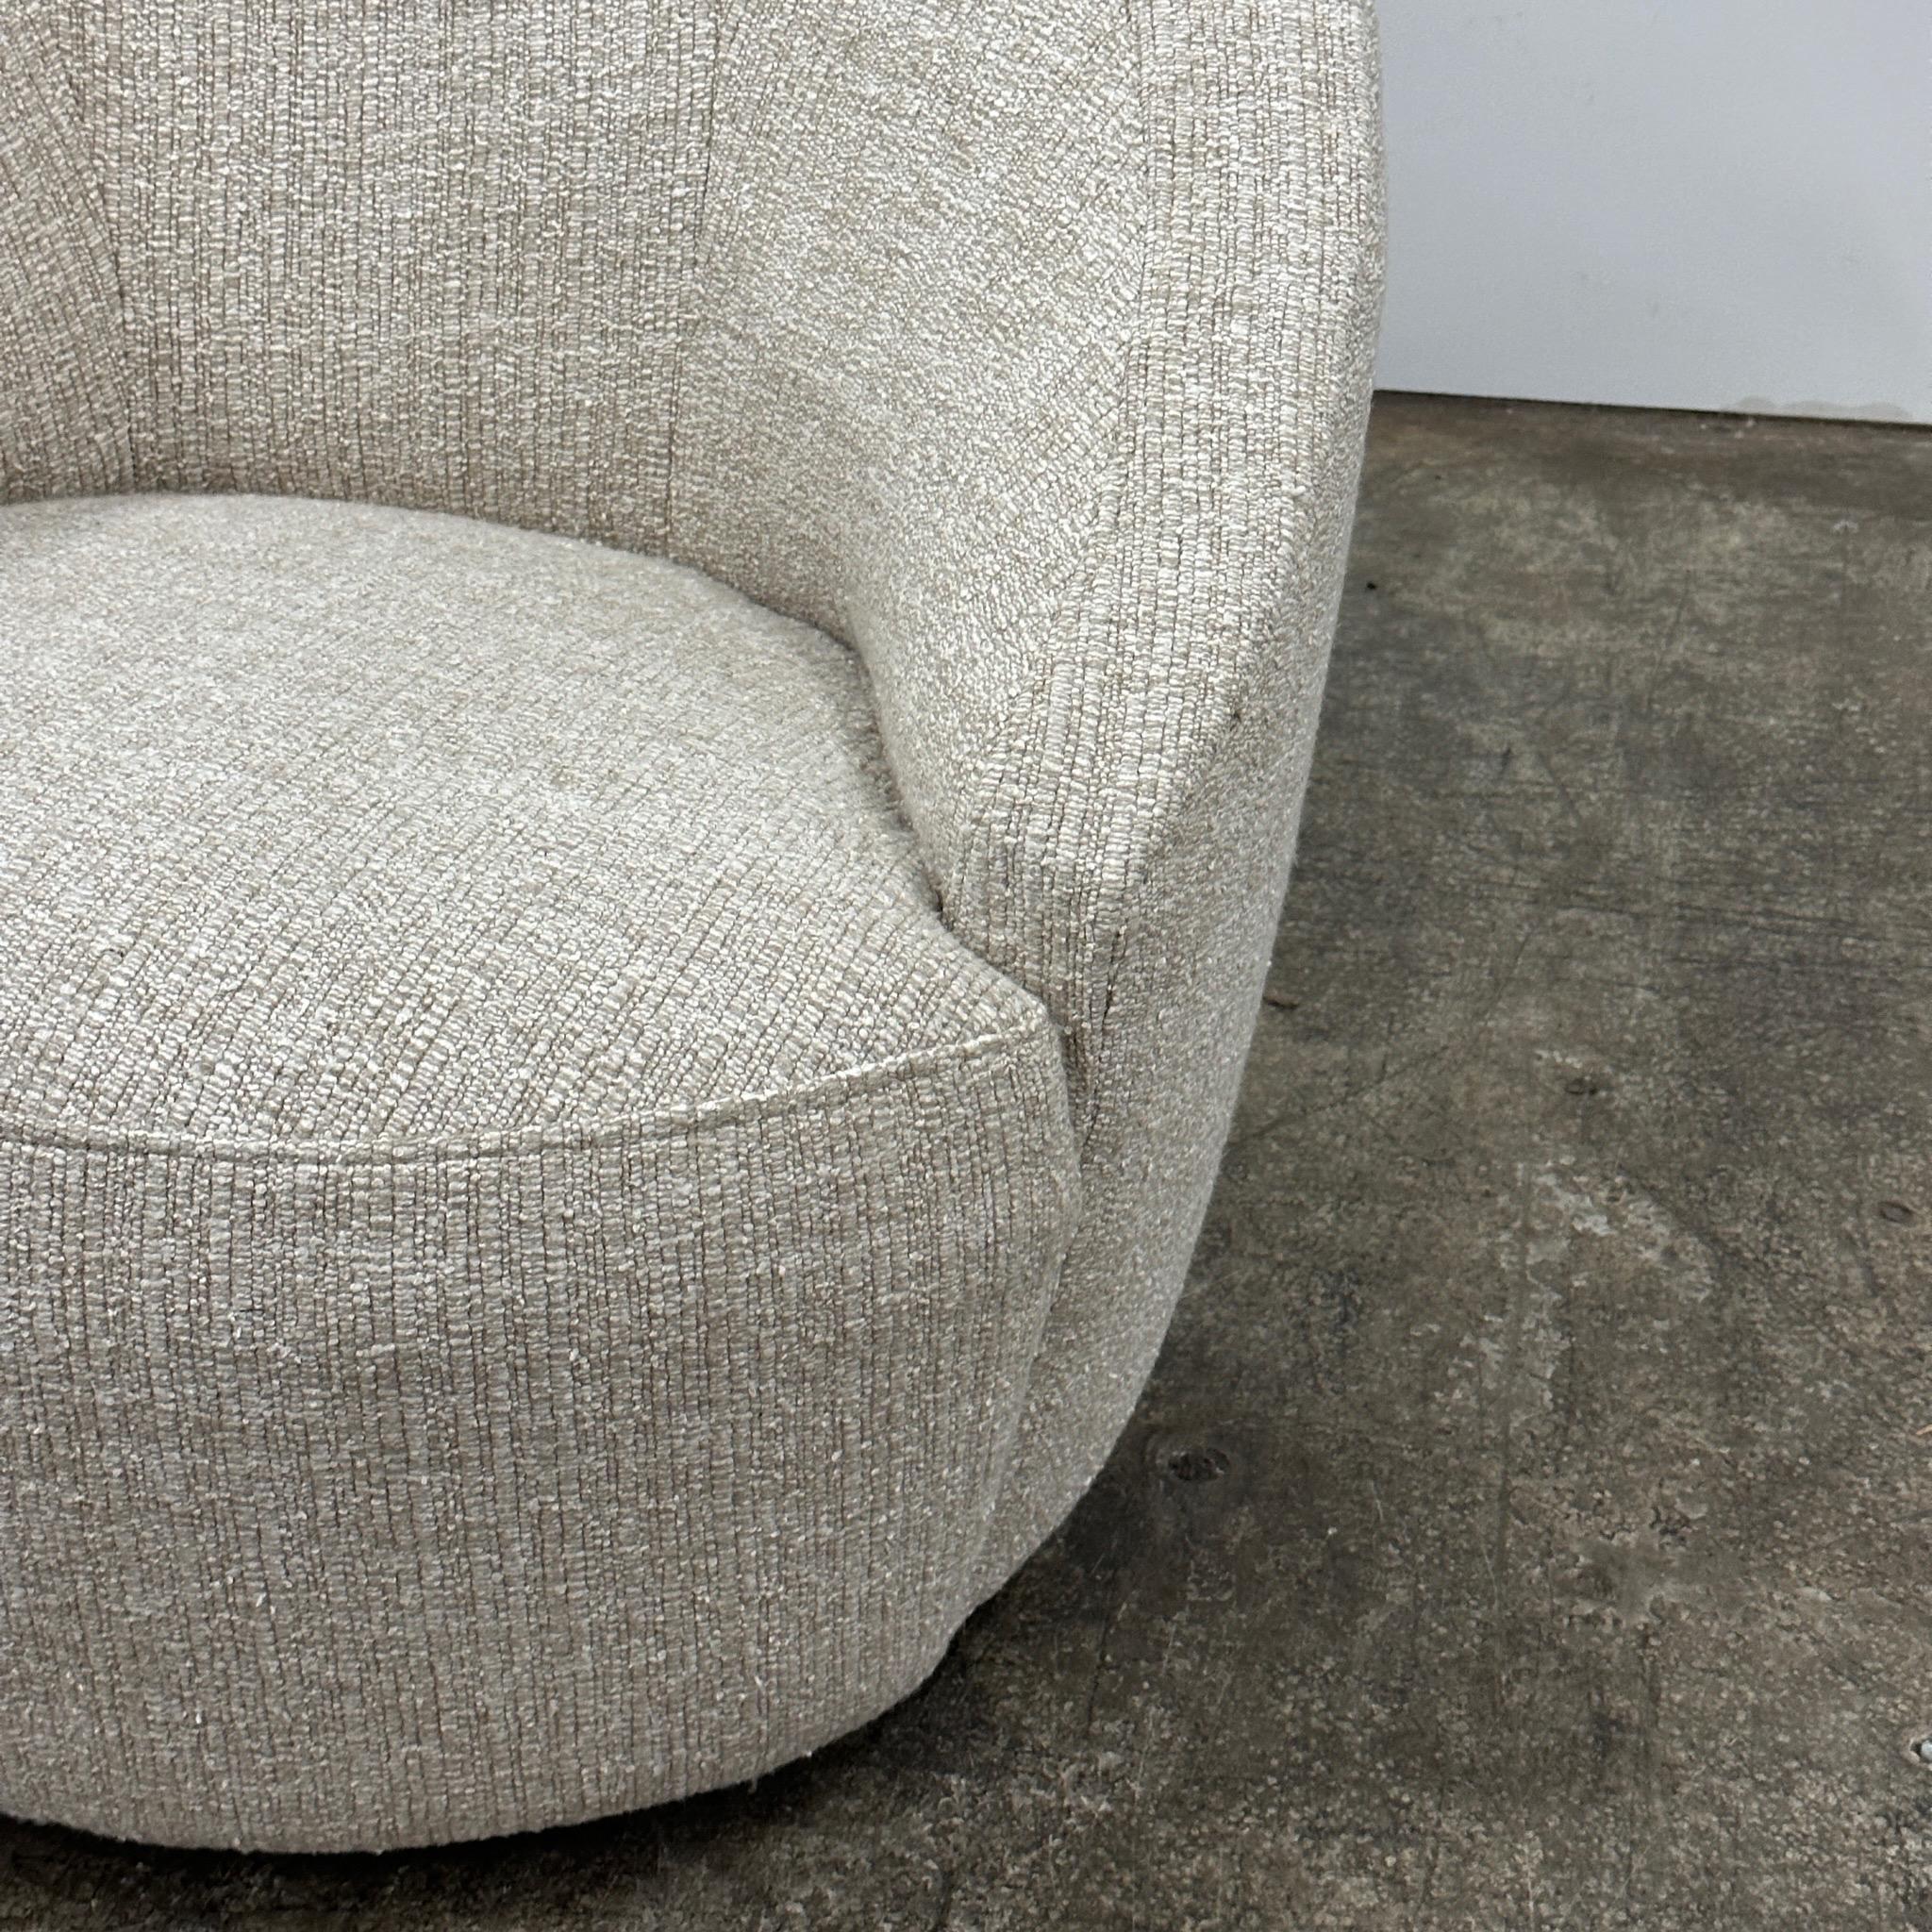 c. 1980s. Reupholstered in nubby chenille from Fishman's Fabrics. Tagged Directional. Original example designed by Vladimir Kagan, not one of the fake remakes of it. 